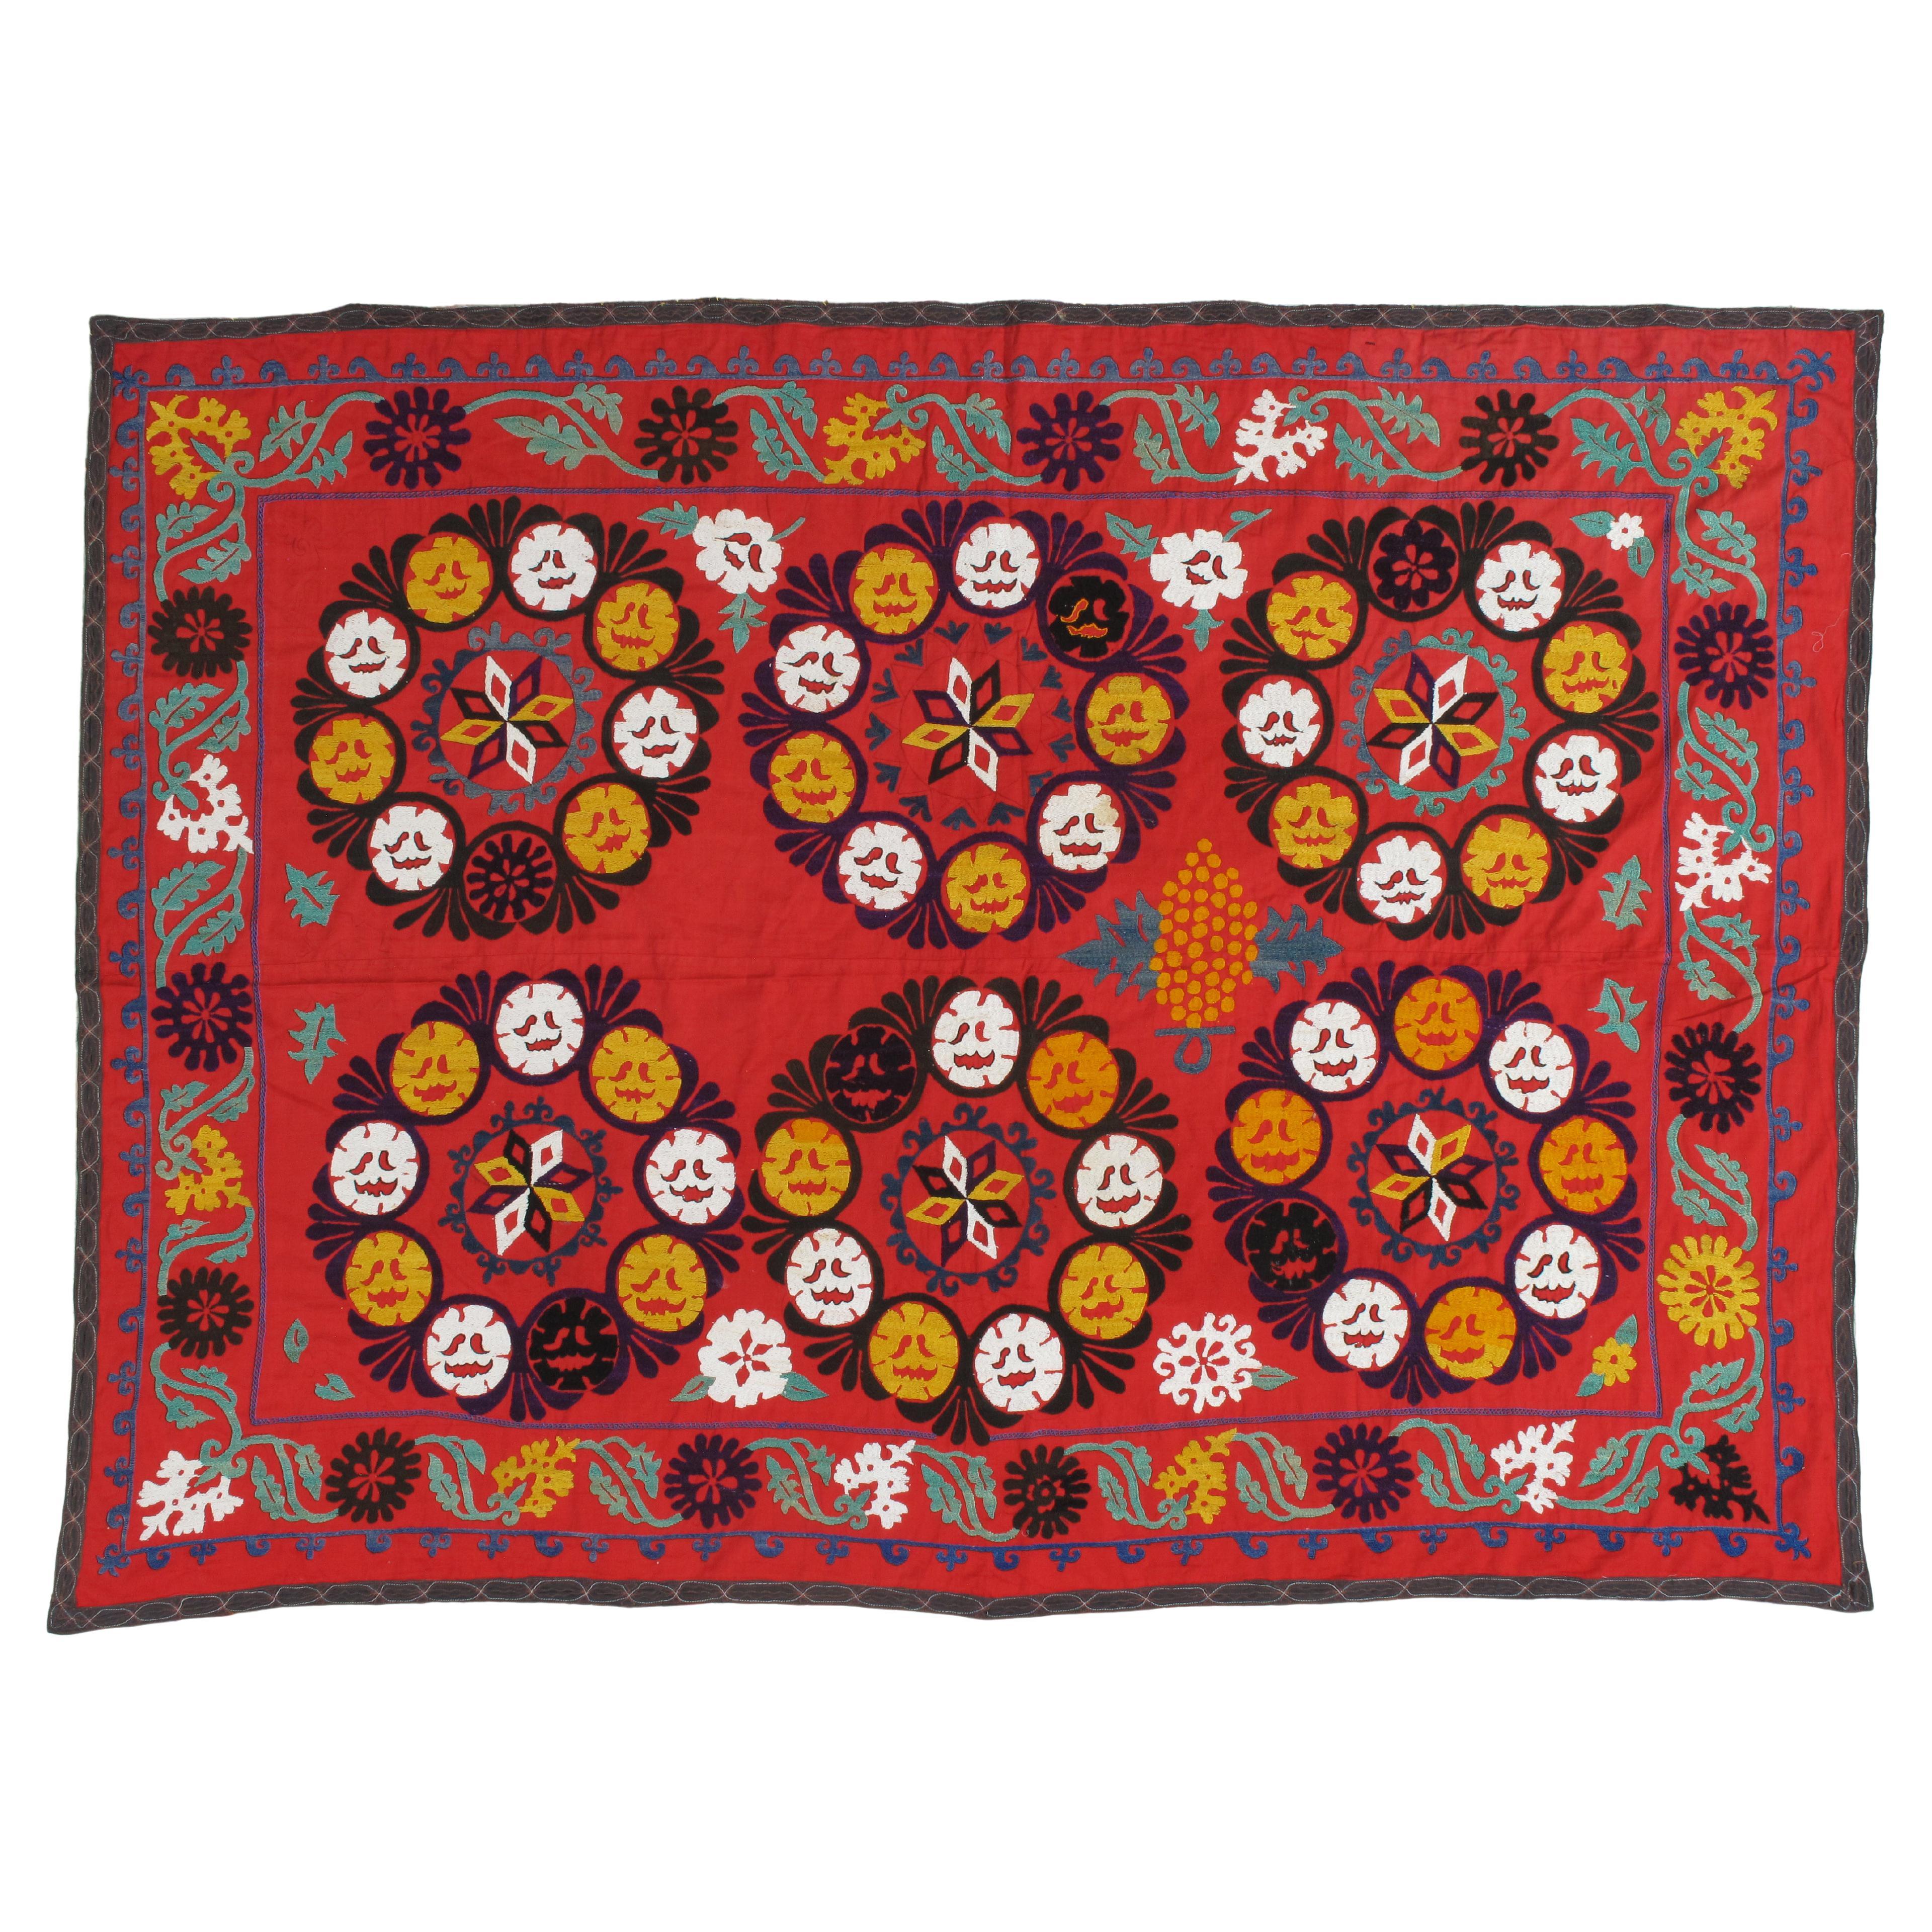 Late 20th Century Suzani Style Textile, Red, Yellow, Black, Blue